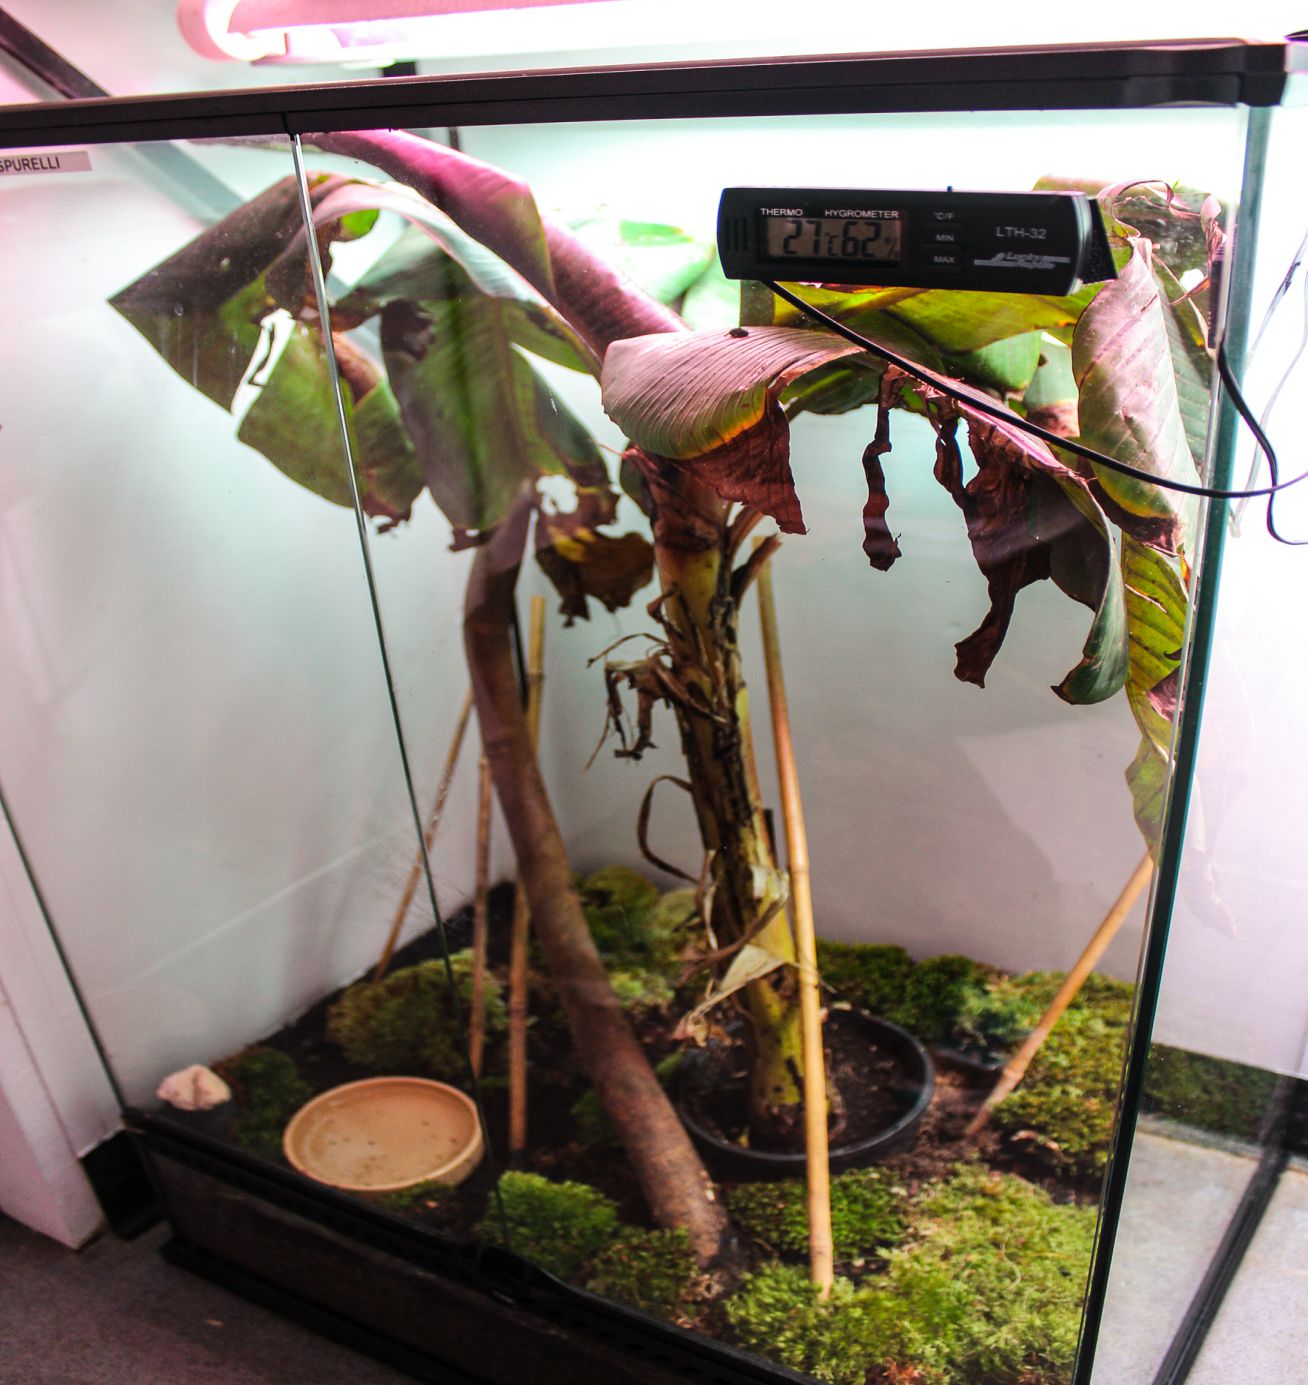 Adult frogs and froglets live in this main tank. Temperature and light levels are regulated to simulate the optimal natural conditions. 
